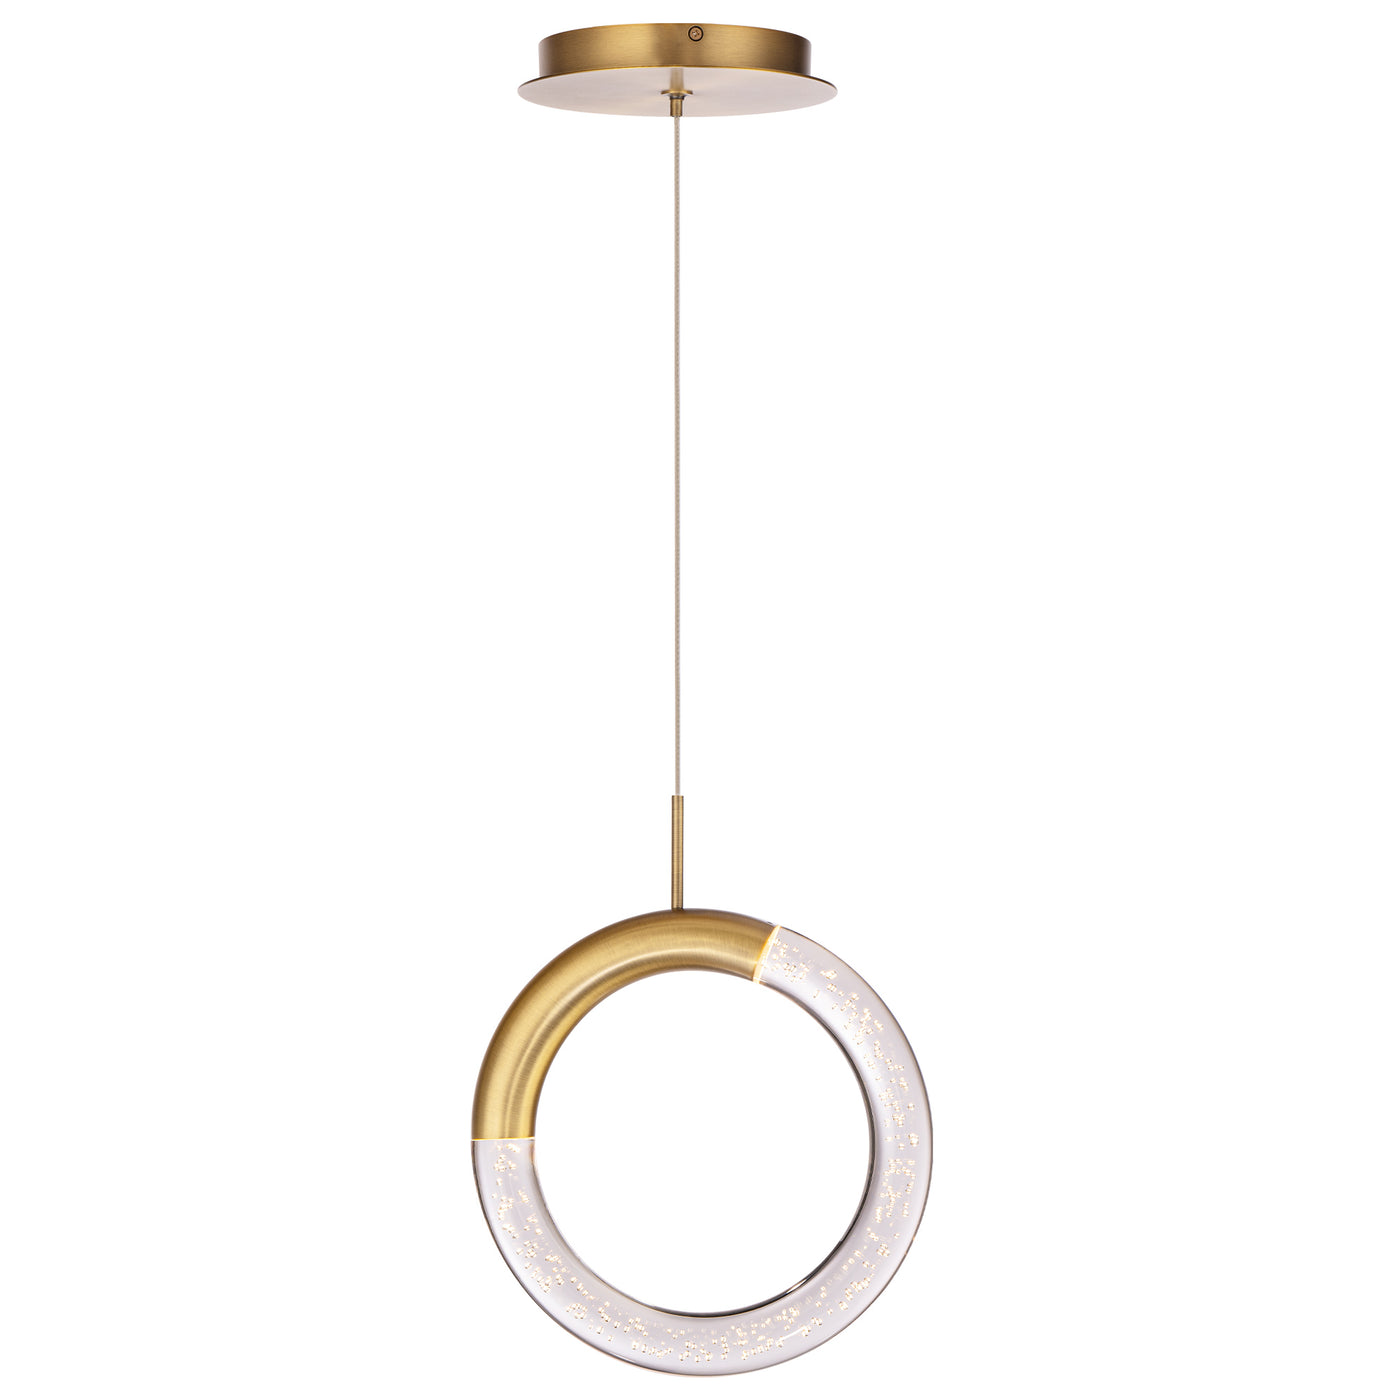 LED Aged Brass Frame with Acrylic Diffuser Ring Pendant